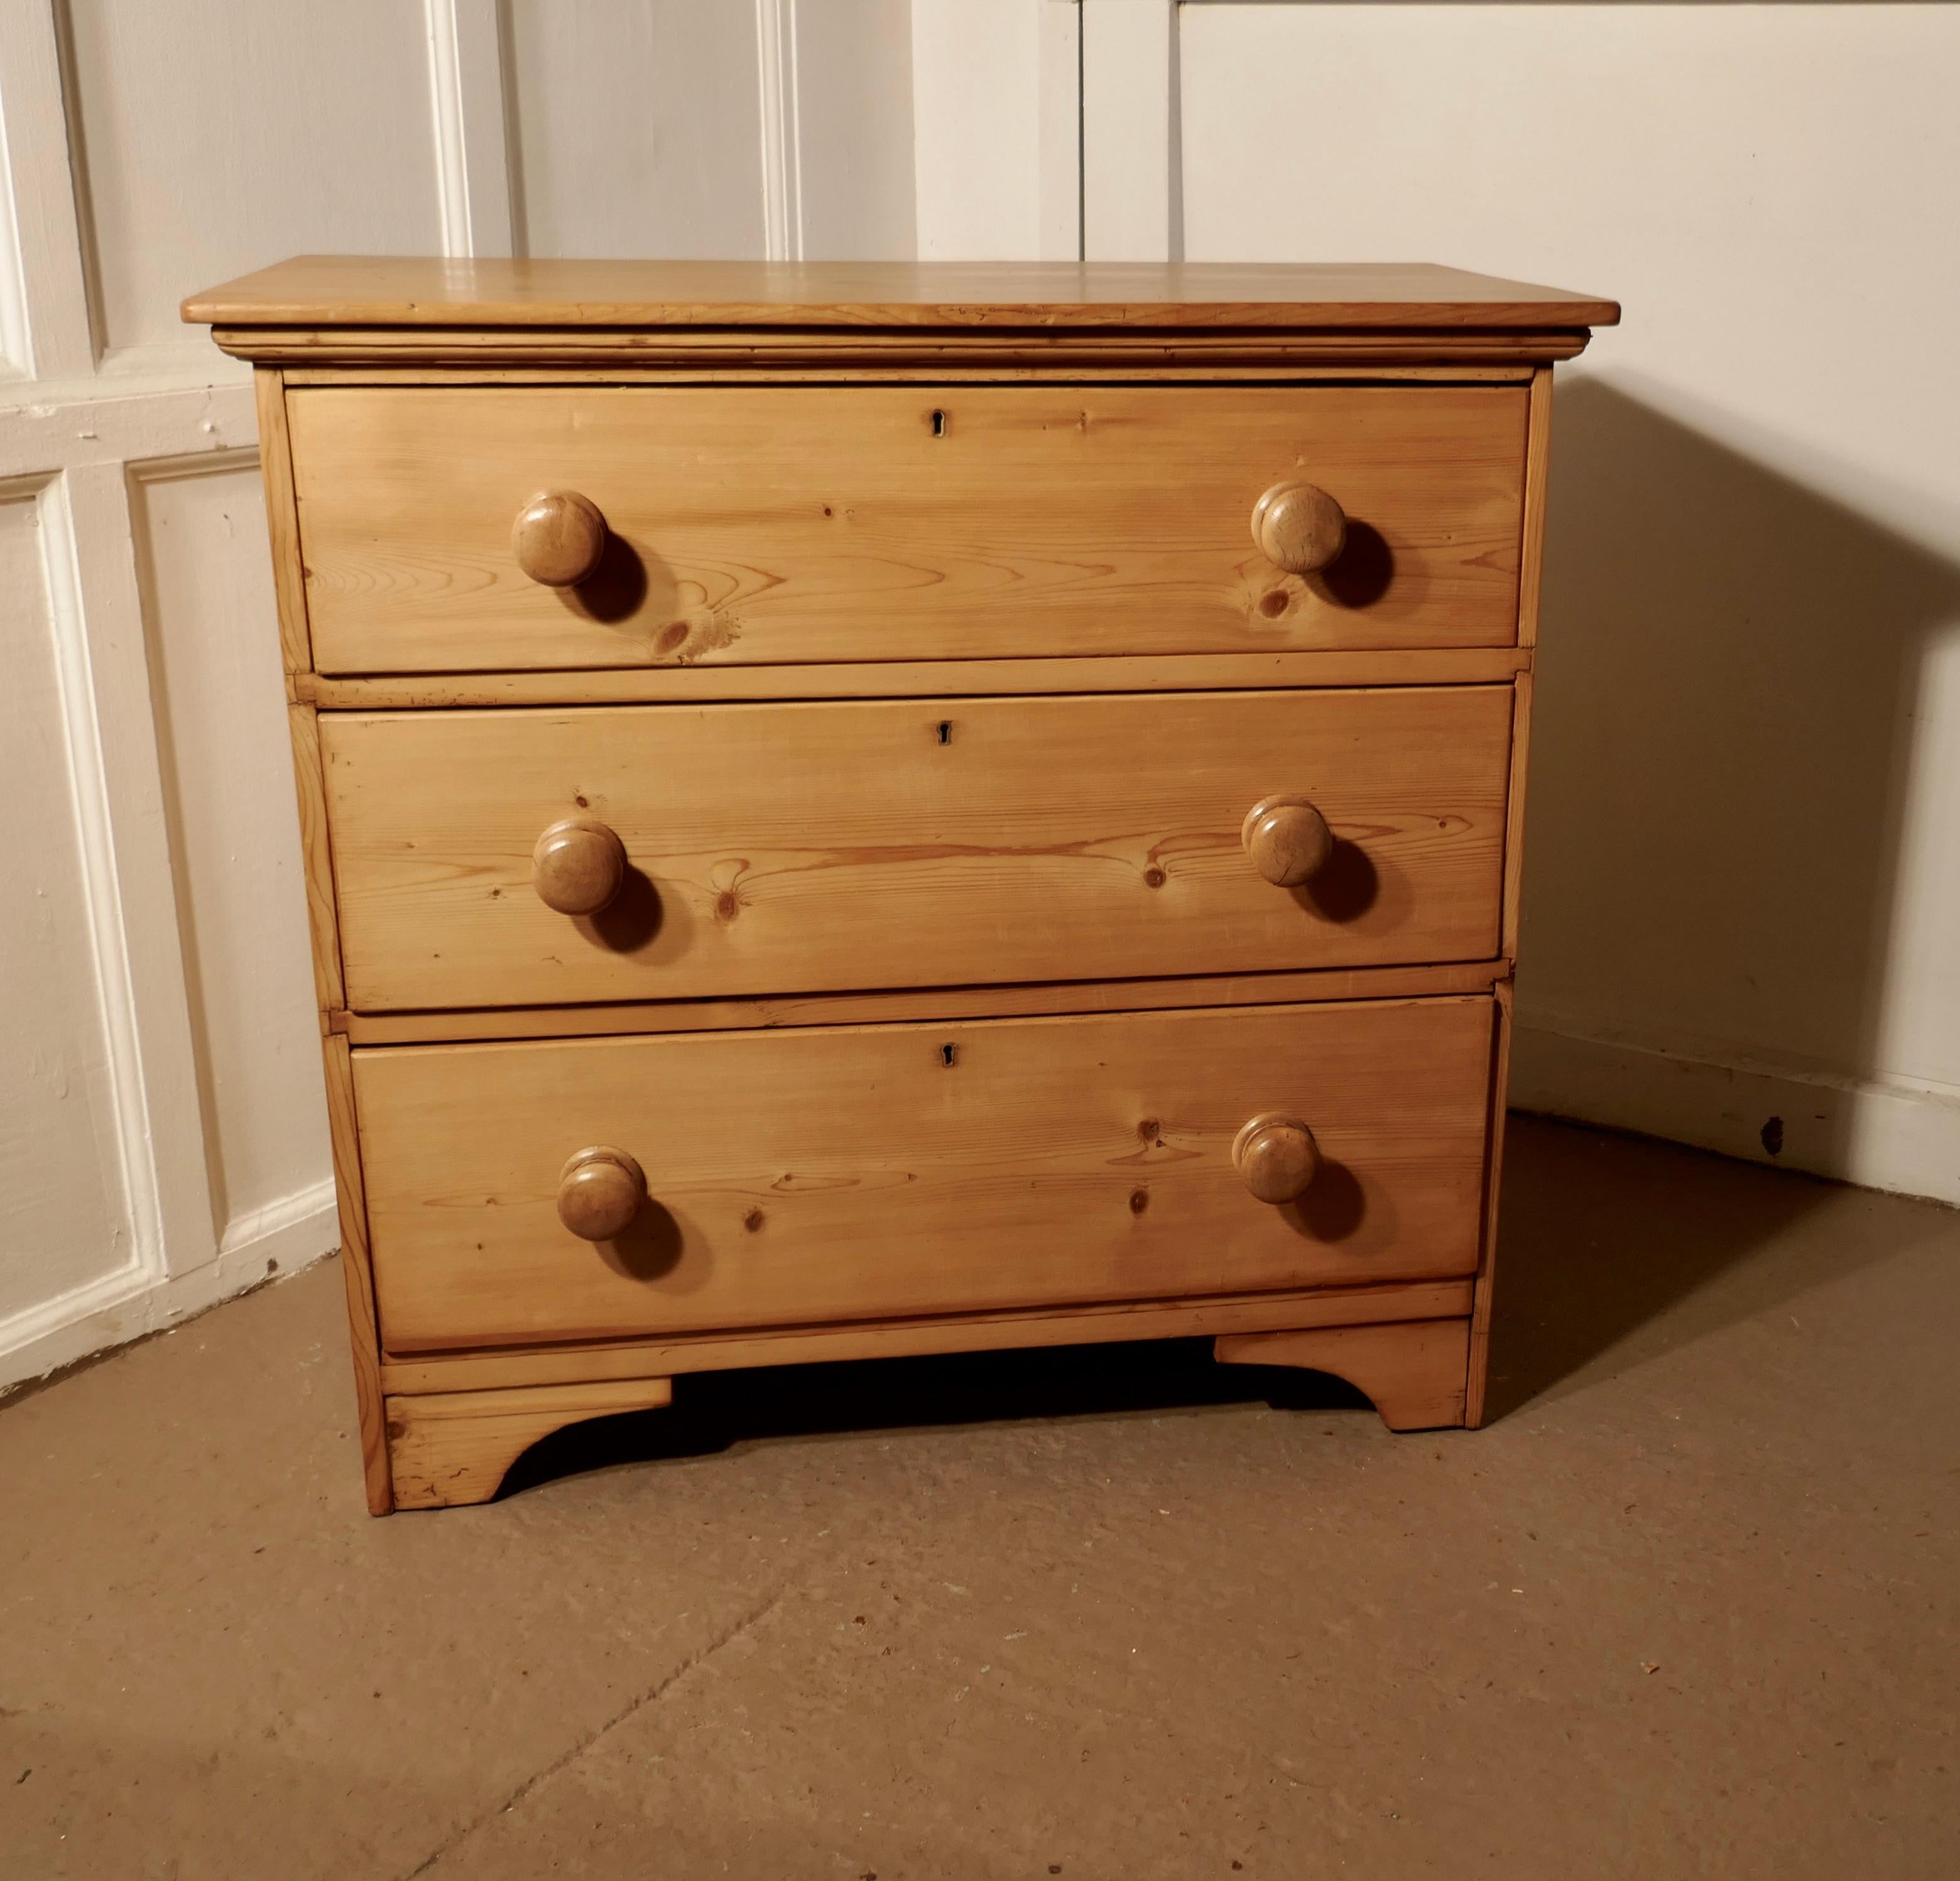 Victorian stripped pine chest of drawers

This lovely old pine chest of drawers has three graduated drawers and it has its original turned wooden knob handles
The chest stands on a bracket footed plinth with shaped feet, the chest has been